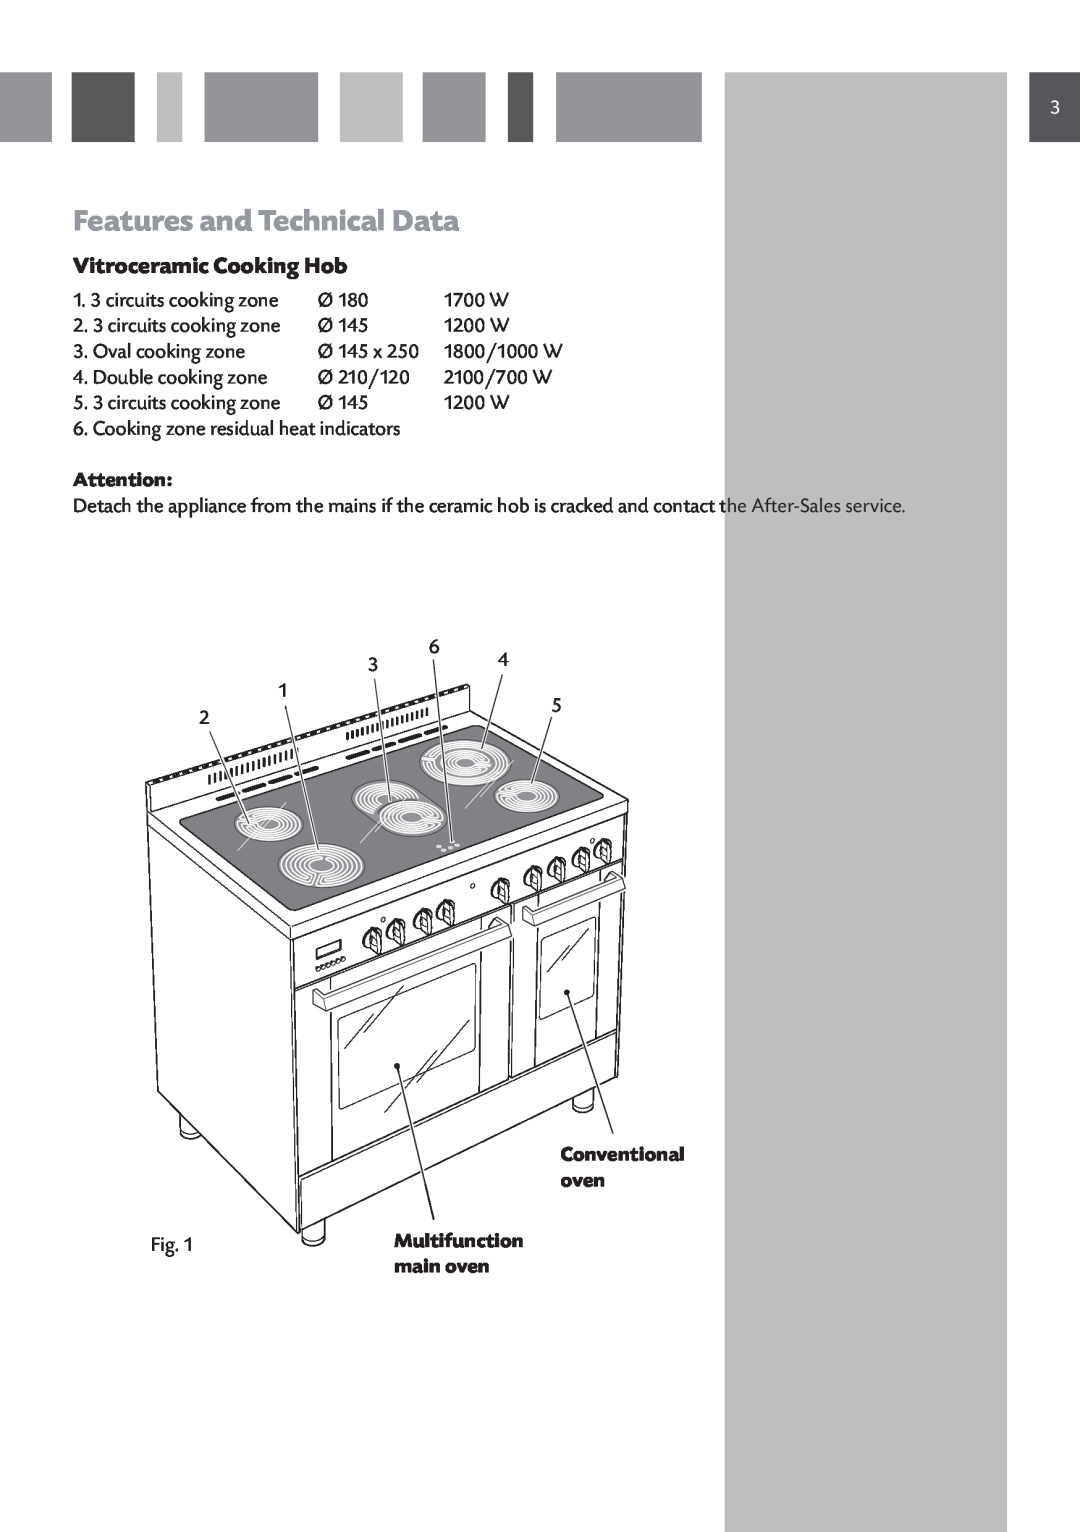 CDA RC 9620 manual Features and Technical Data, Vitroceramic Cooking Hob, main oven 